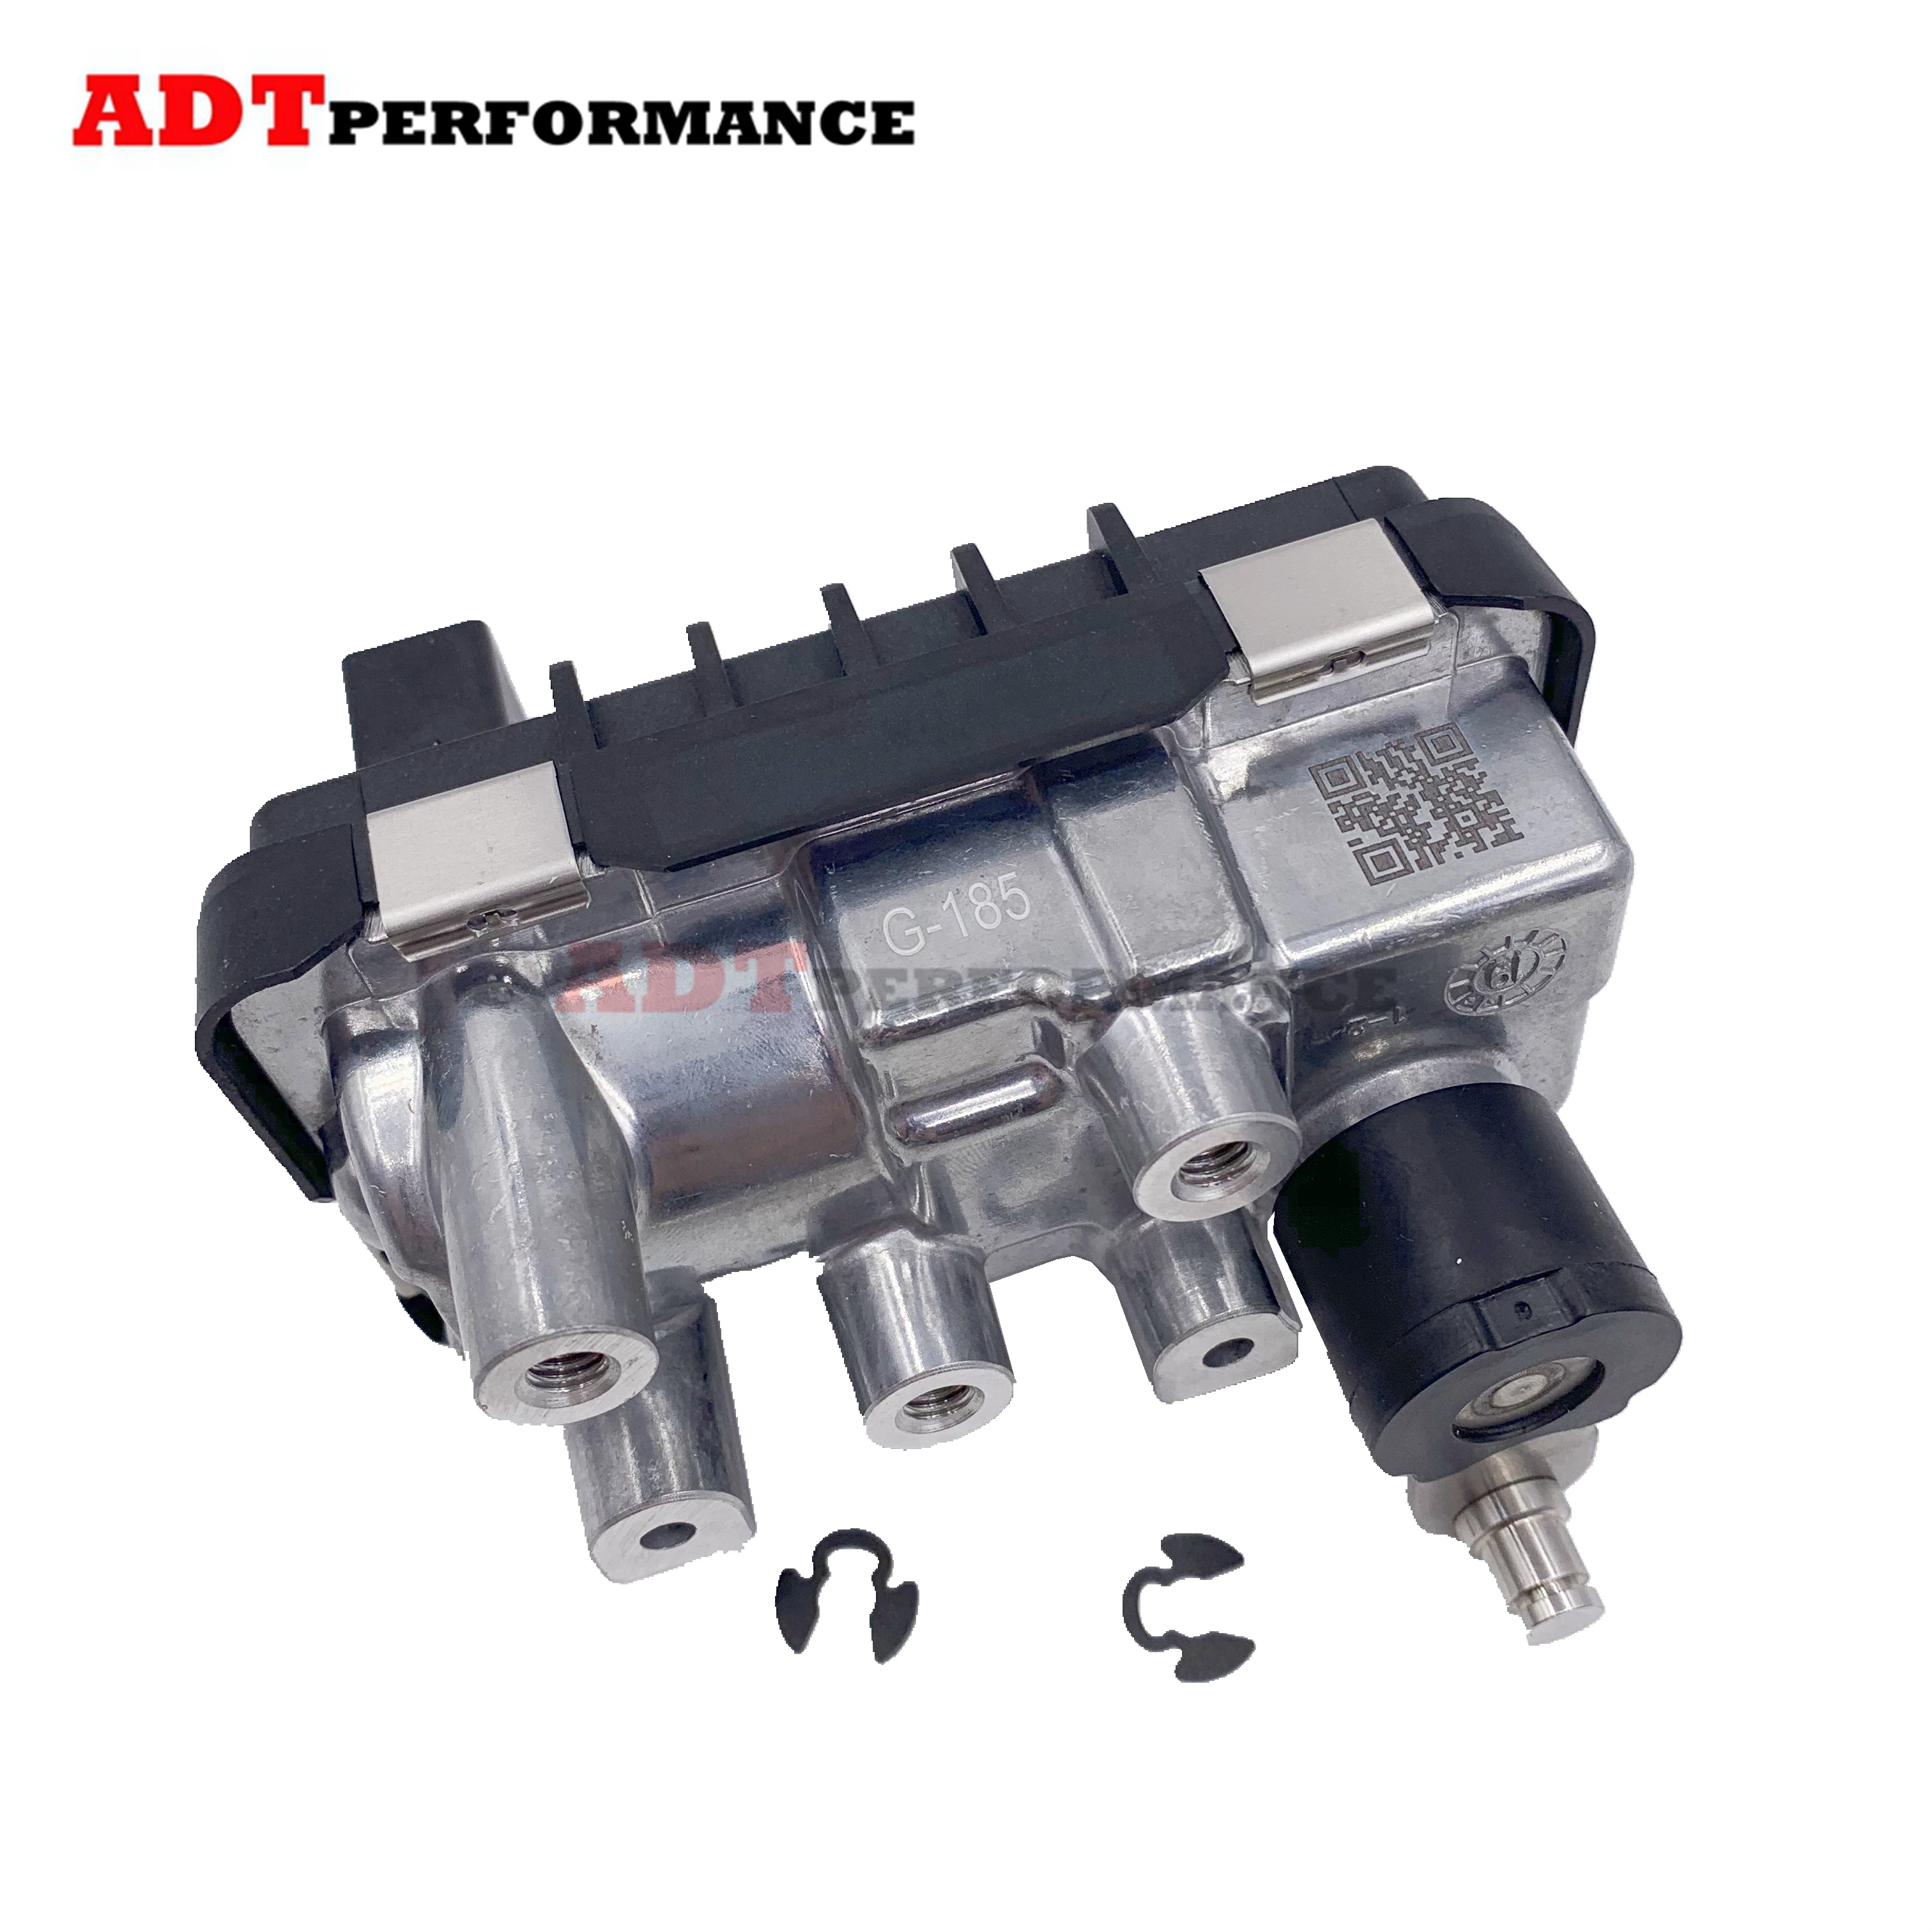 

GT1852V Turbo Electronic Actuator G-185 G185 712120 6NW008412 A6460900180 Turbine Wastegate for Mercedes E-Klasse 200 CDI W211 9